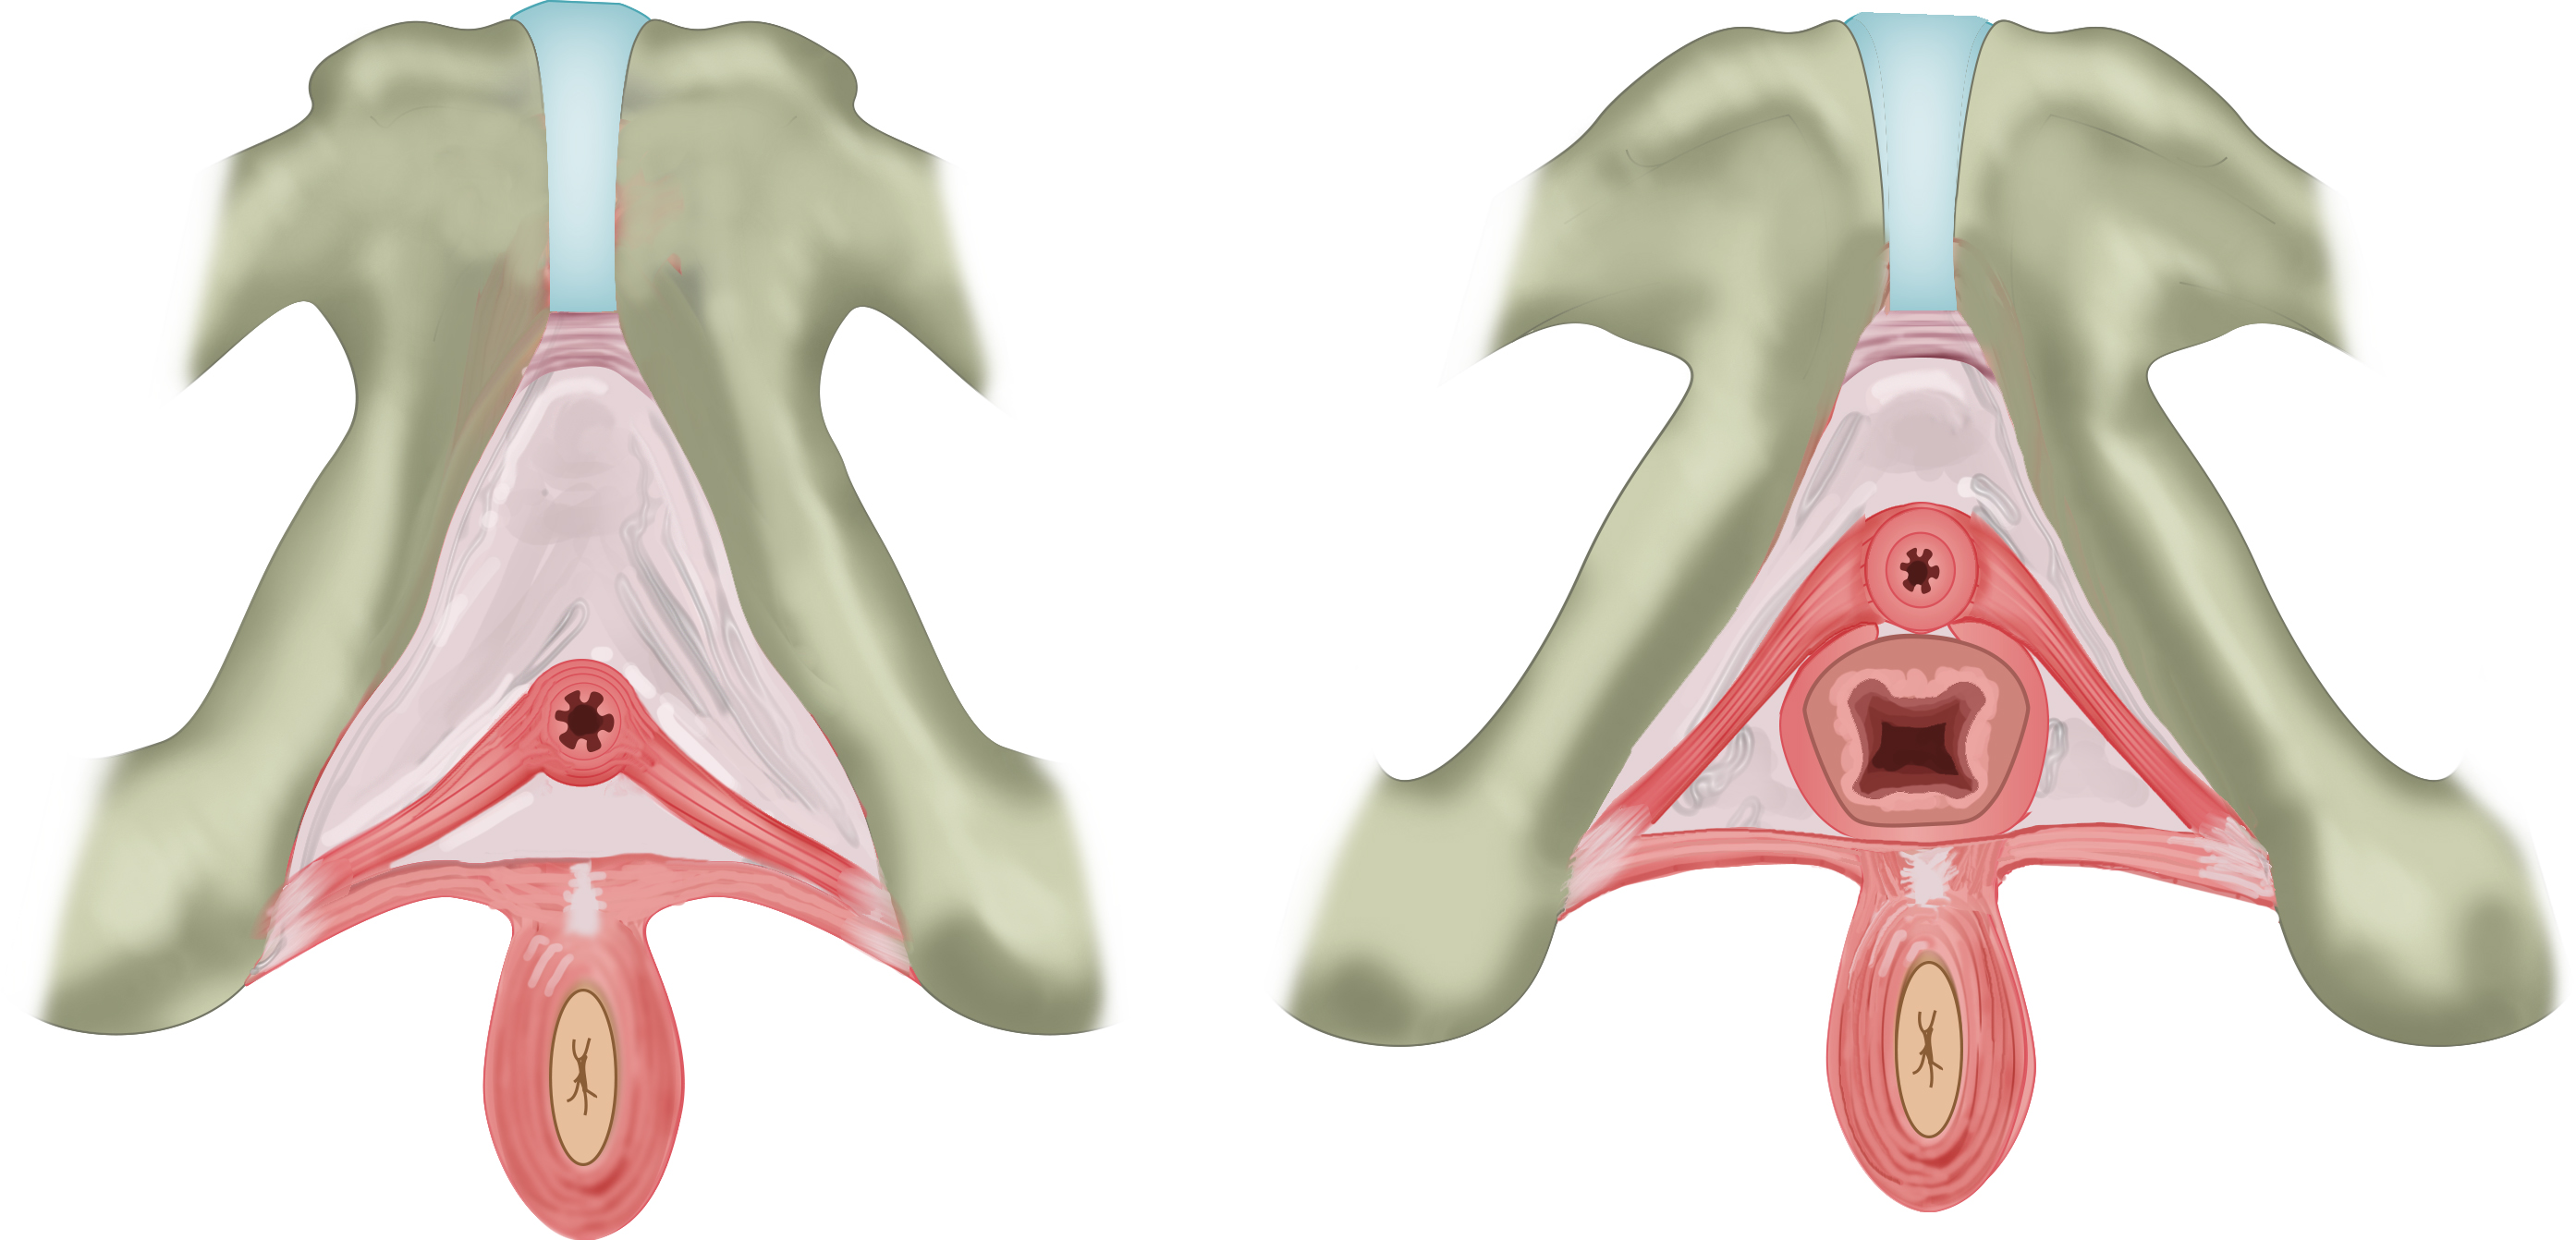 Inferior view of the deep male and female perineal pouch - no labels